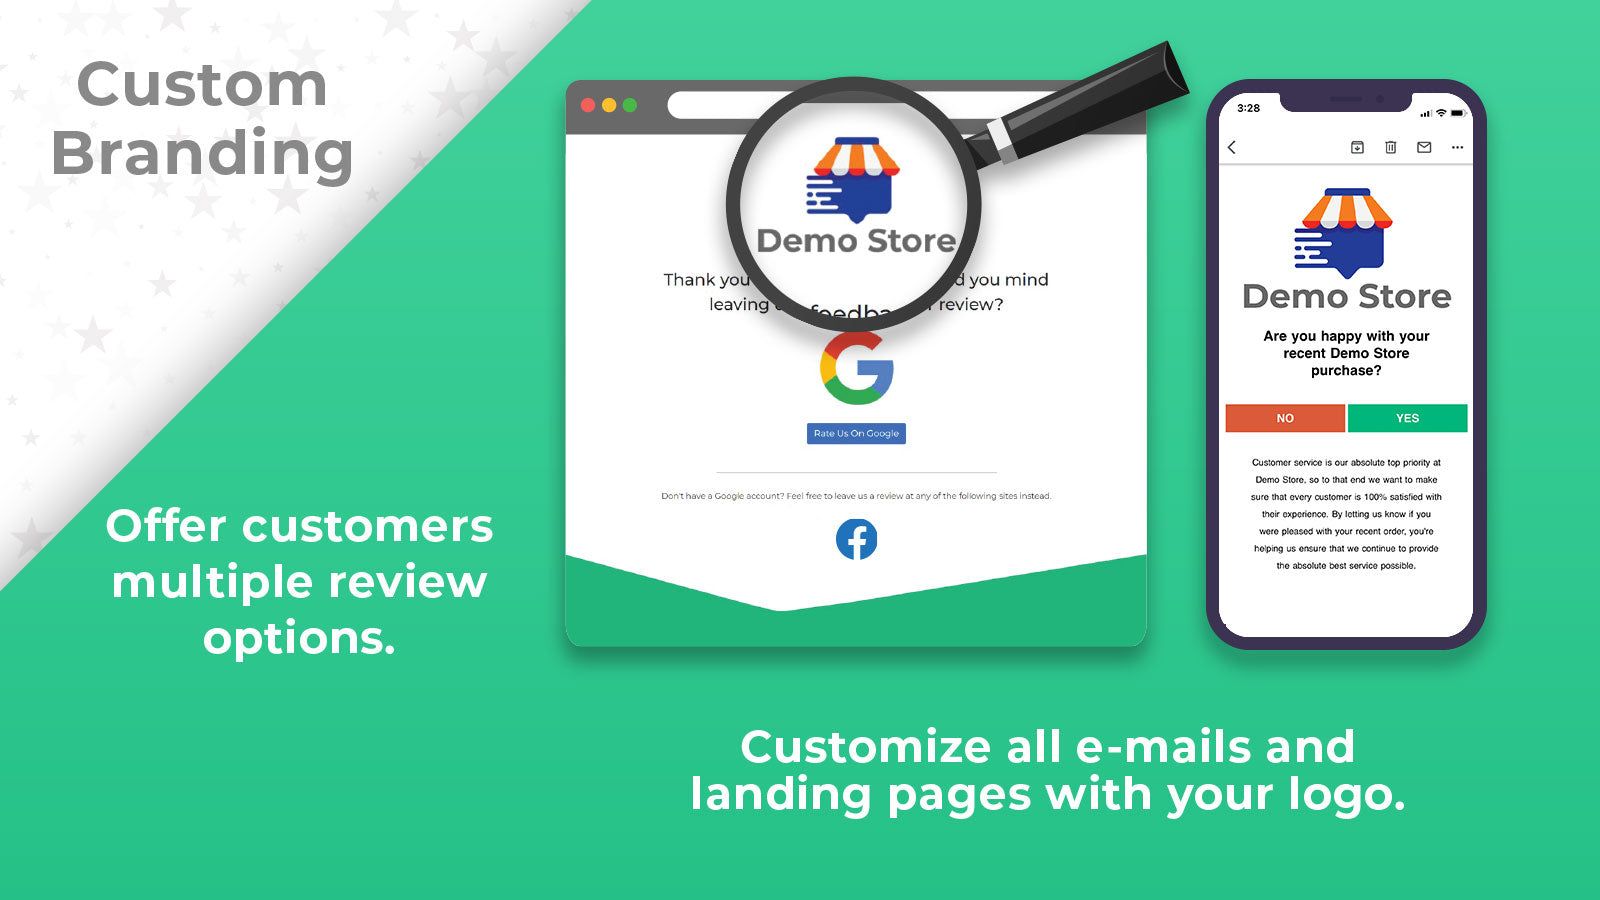 Add custom logos to e-mails and landing pages.